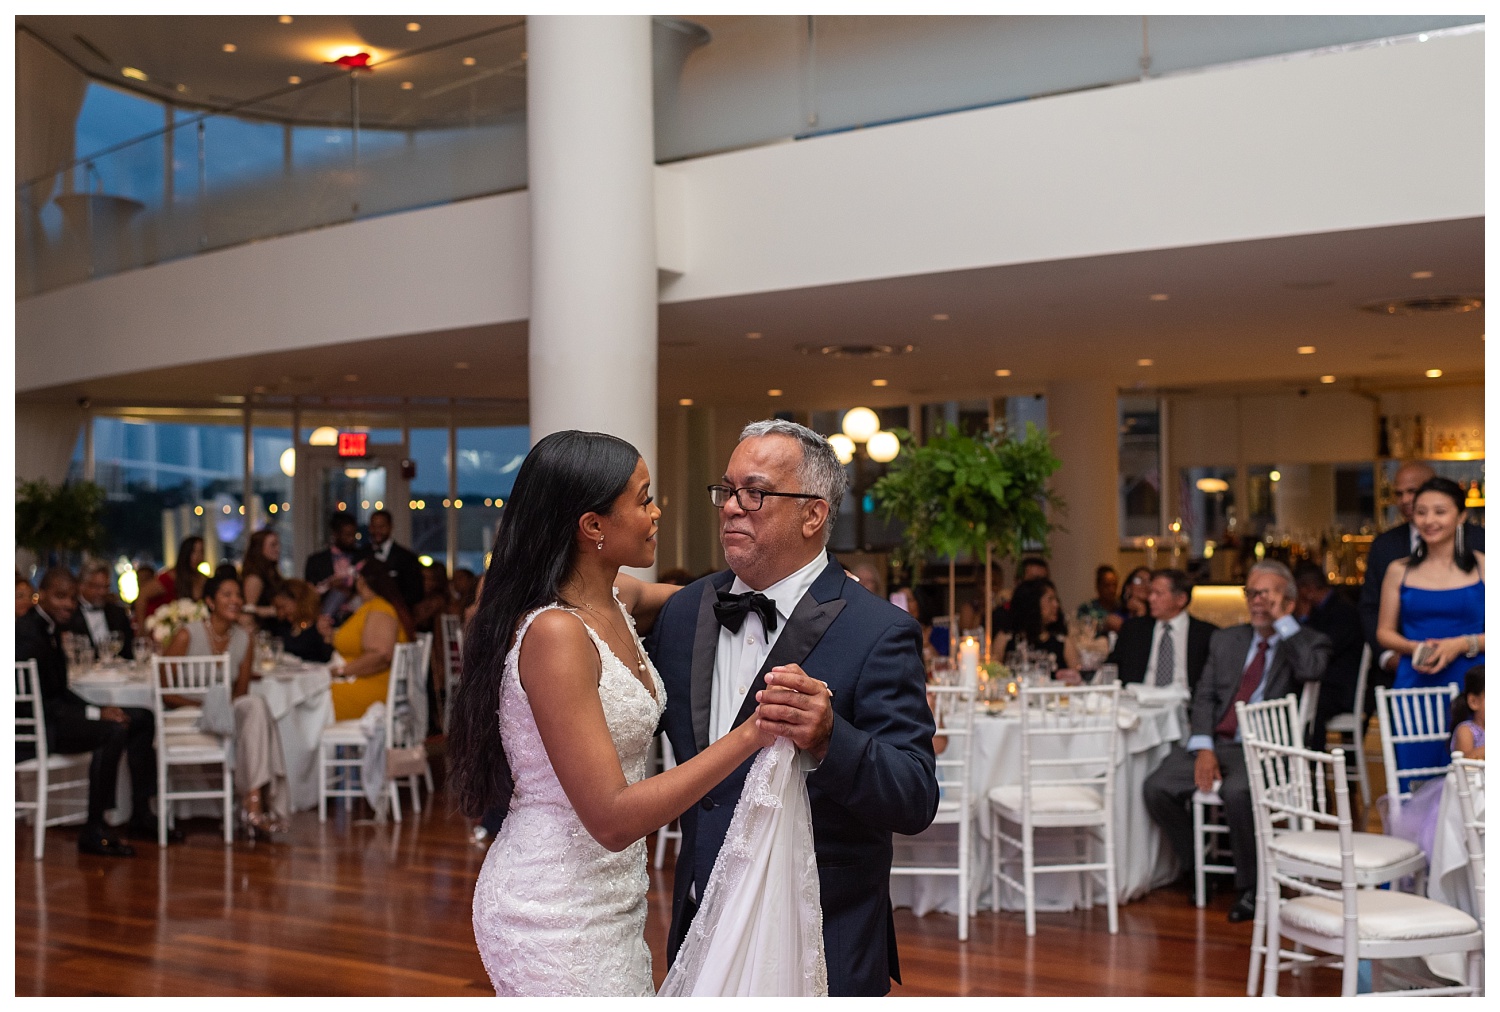 bride dancing with her dad at wedding reception in Georgetown Washington, D.C.